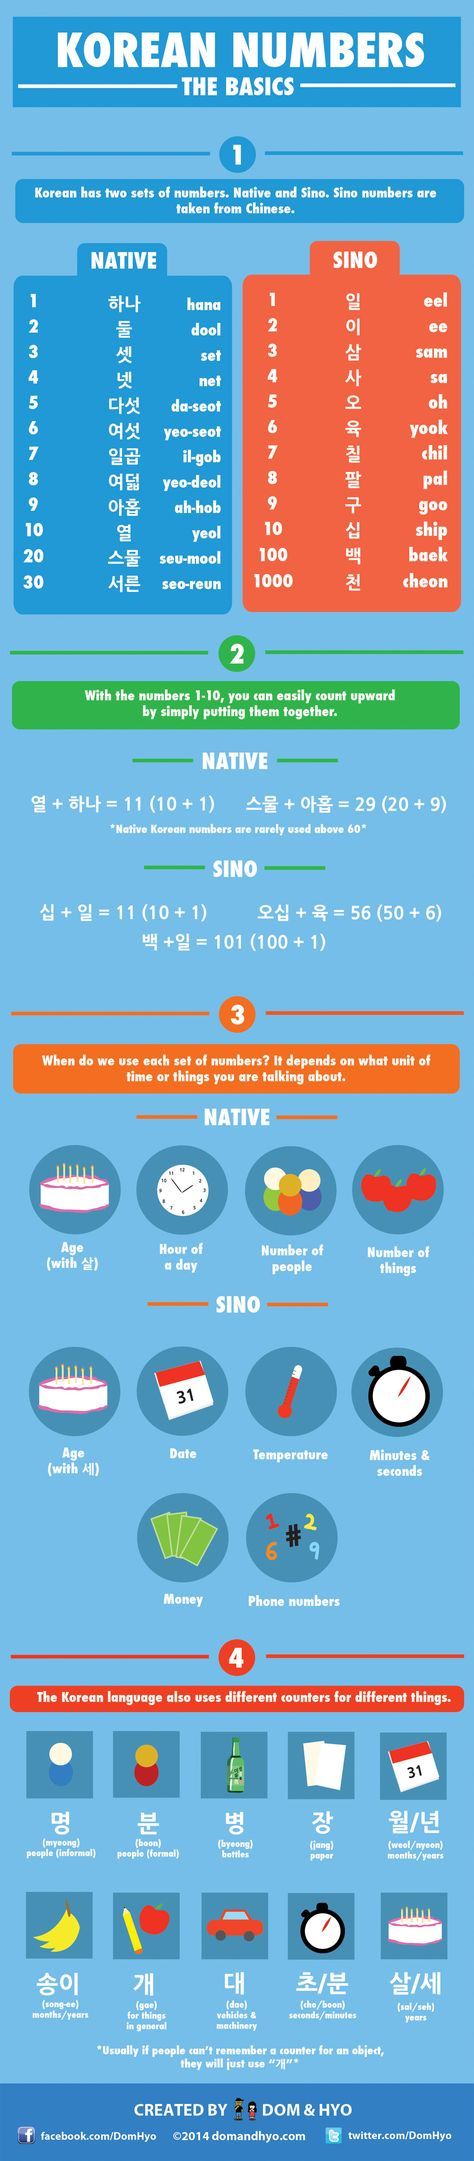 by the numbers infographic - Learn the Basics of Korean Numbers with ...